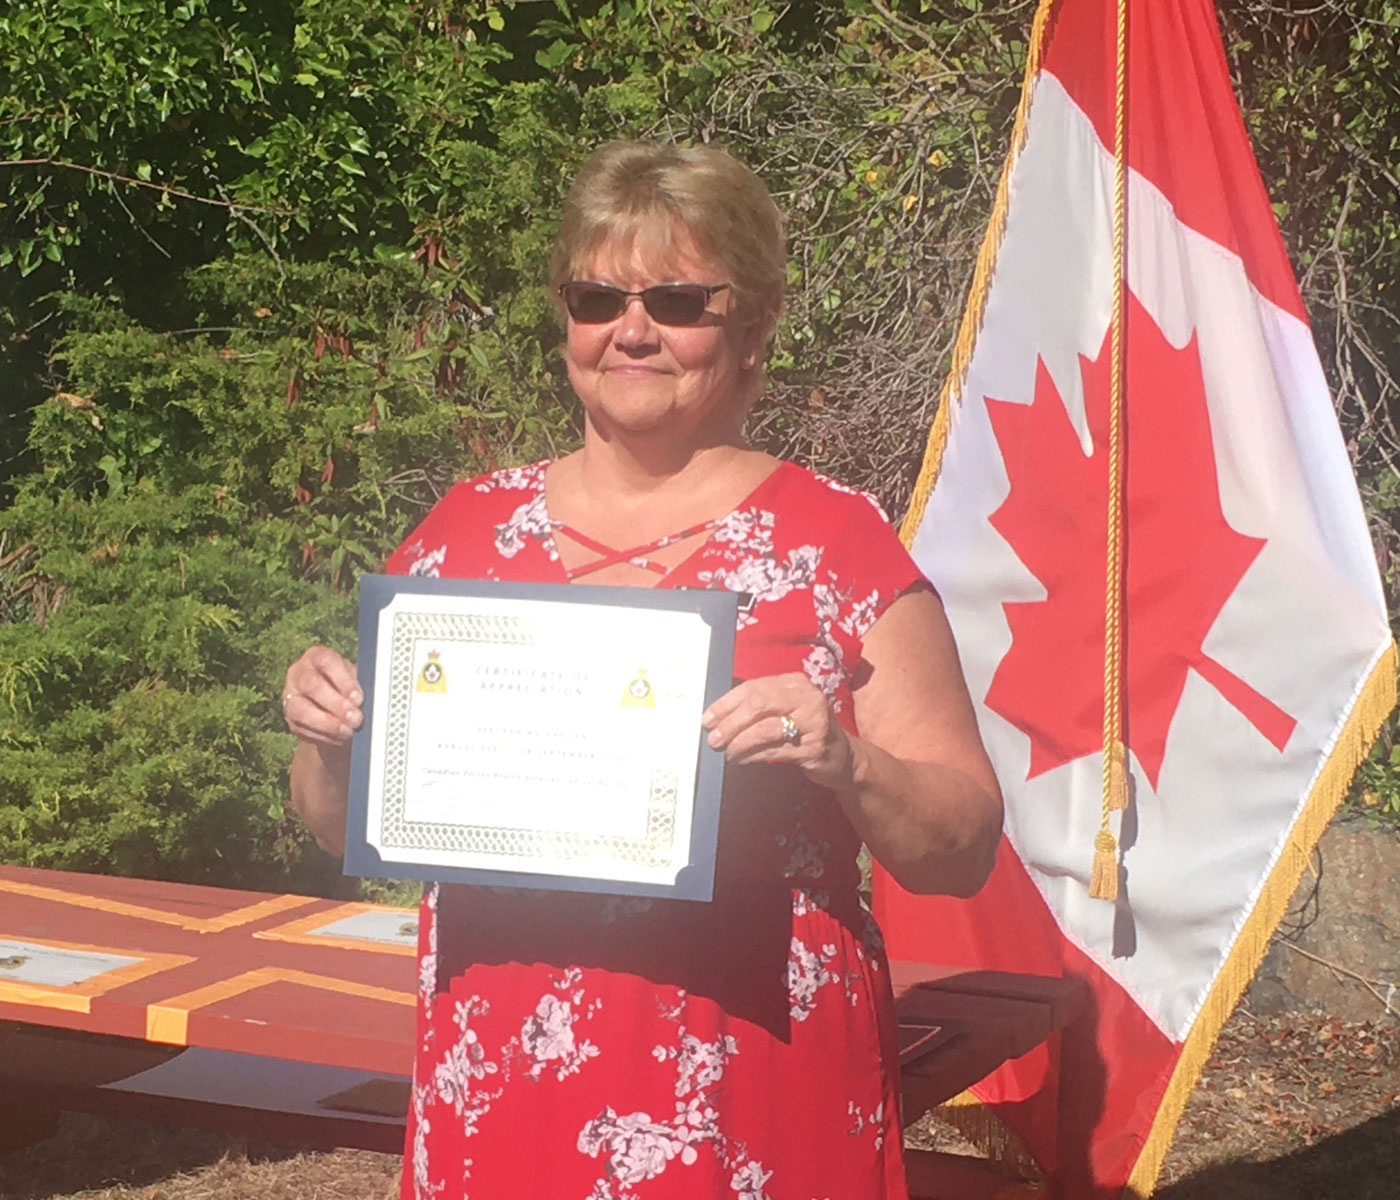 Deborah receives a Certificate of Appreciation from Canadian Forces Health Services Command at her retirement ceremony on Sept. 3. Photo credit Dave Yates